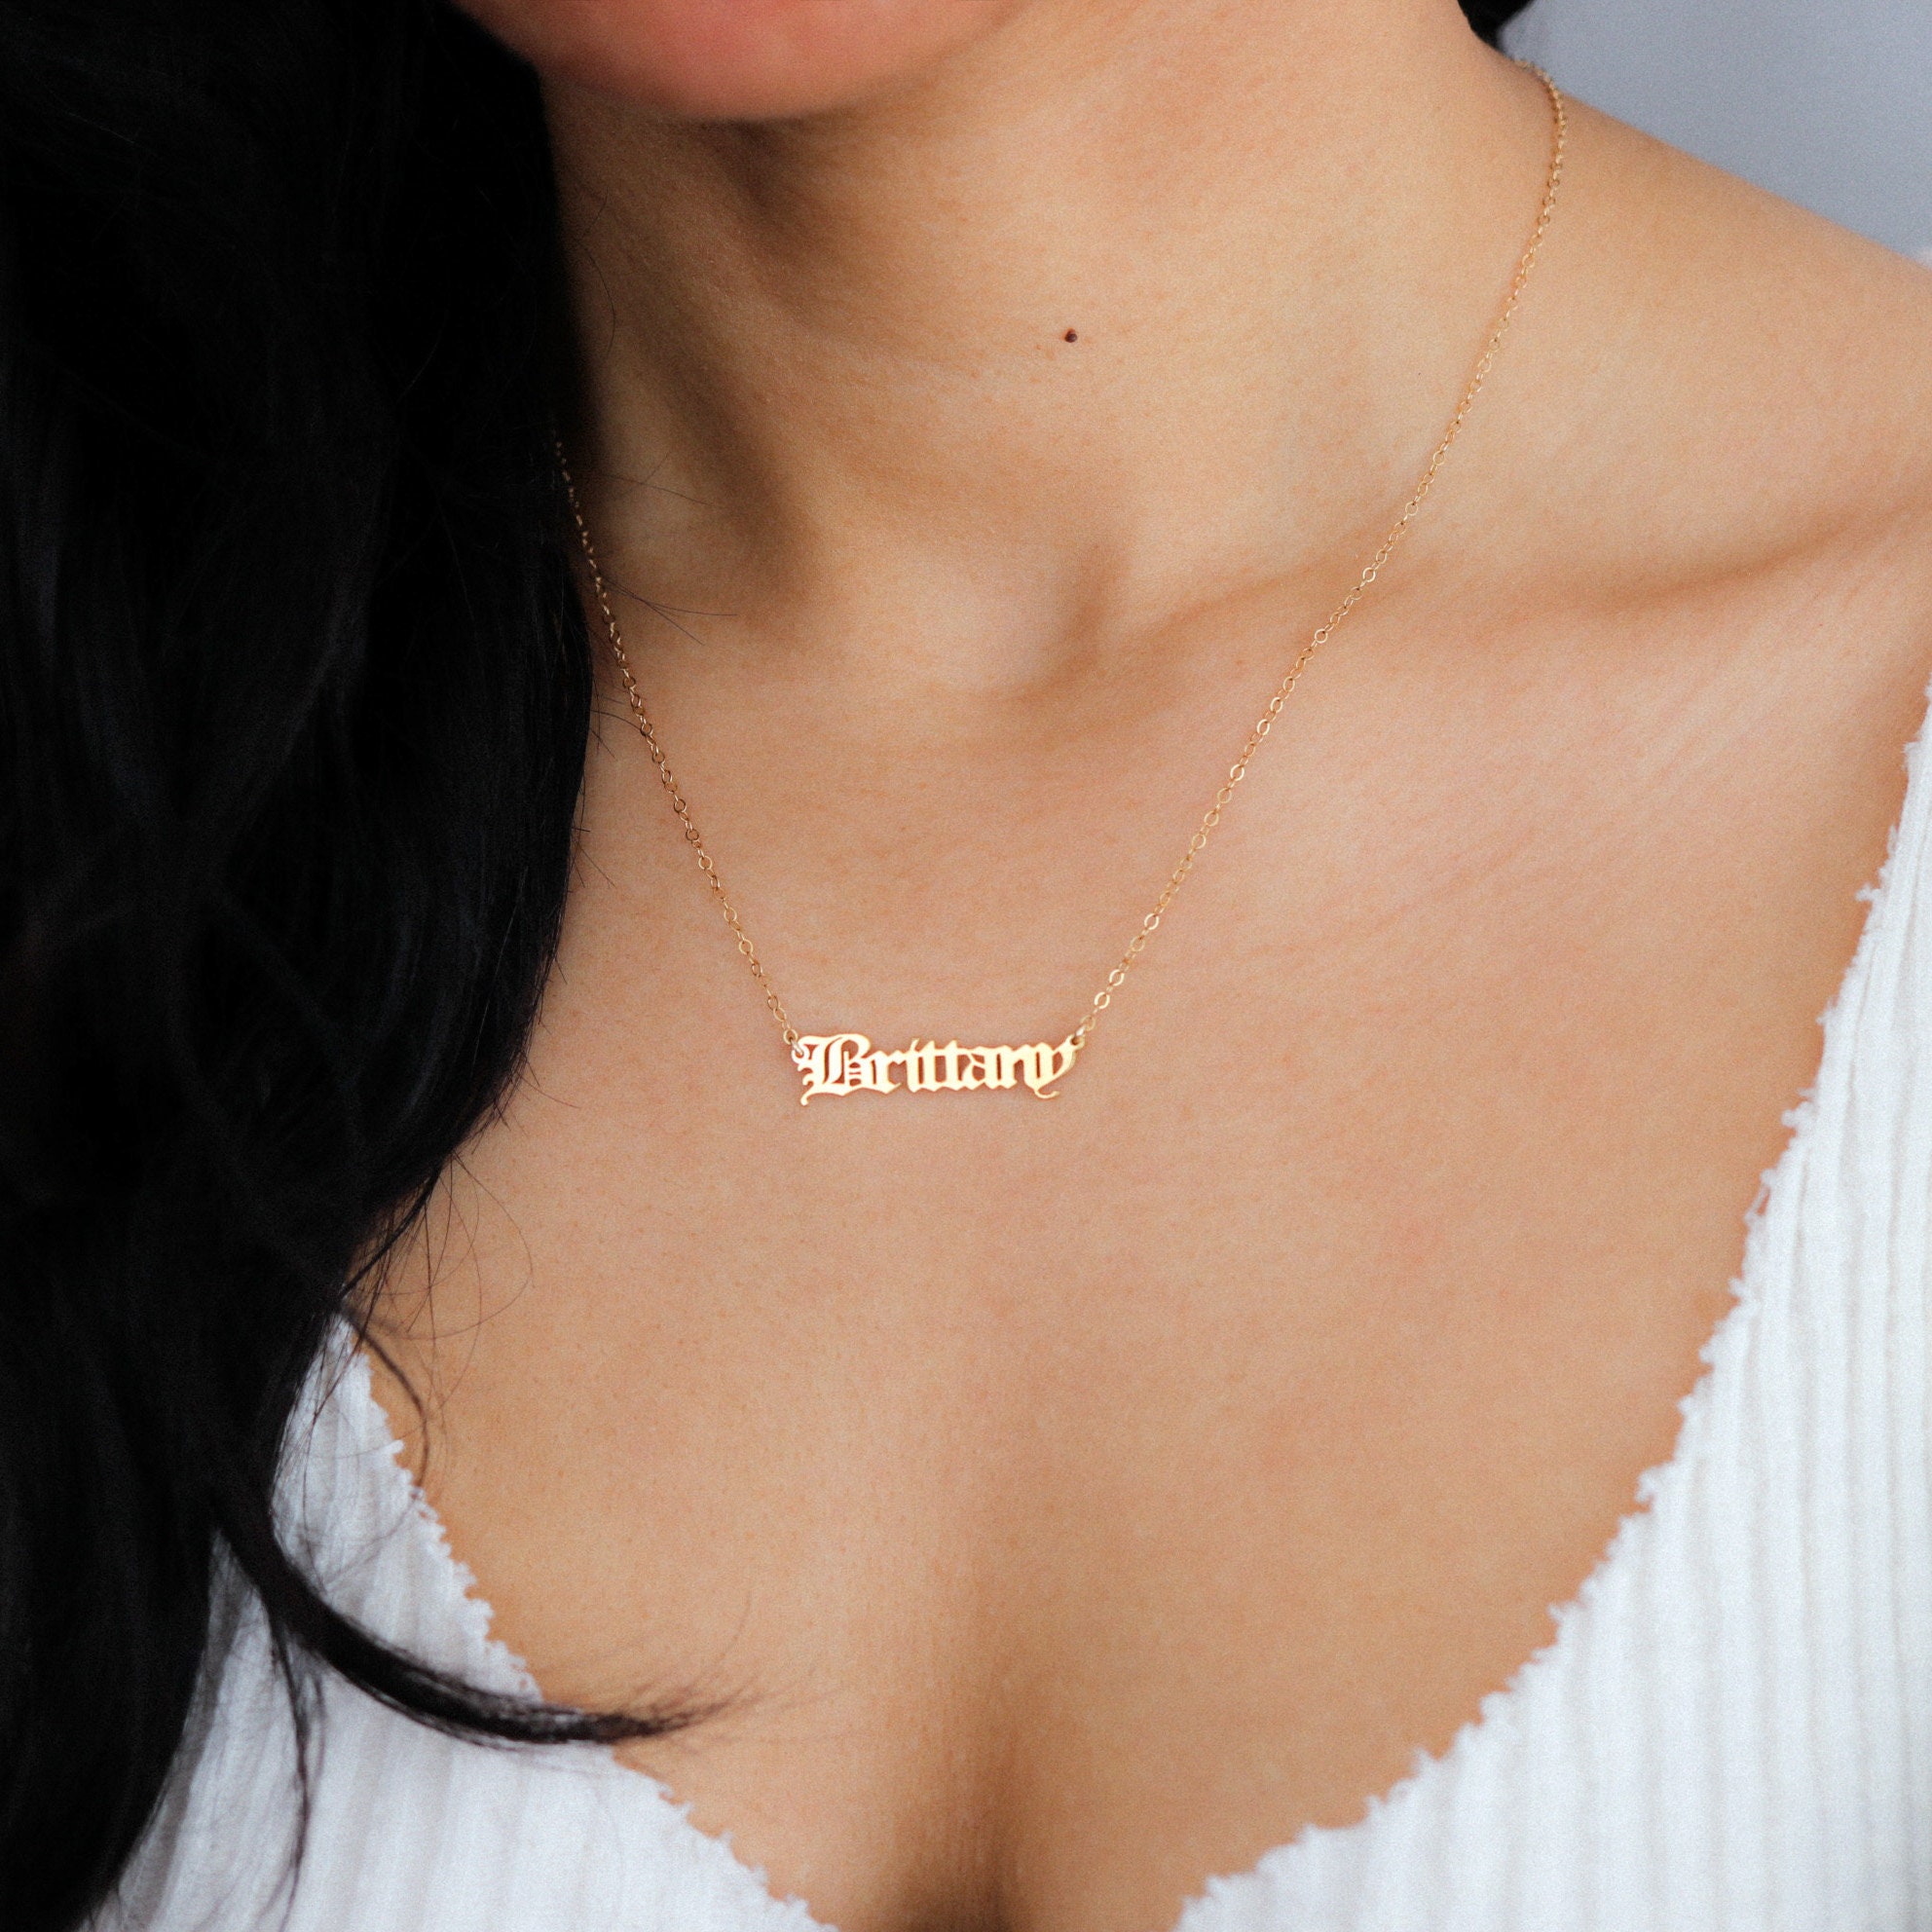 PERSONALIZED GOLD PLATED ENGLISH ARABIC LOOK ANY NAME PLATE NECKLACE  US SELLER 